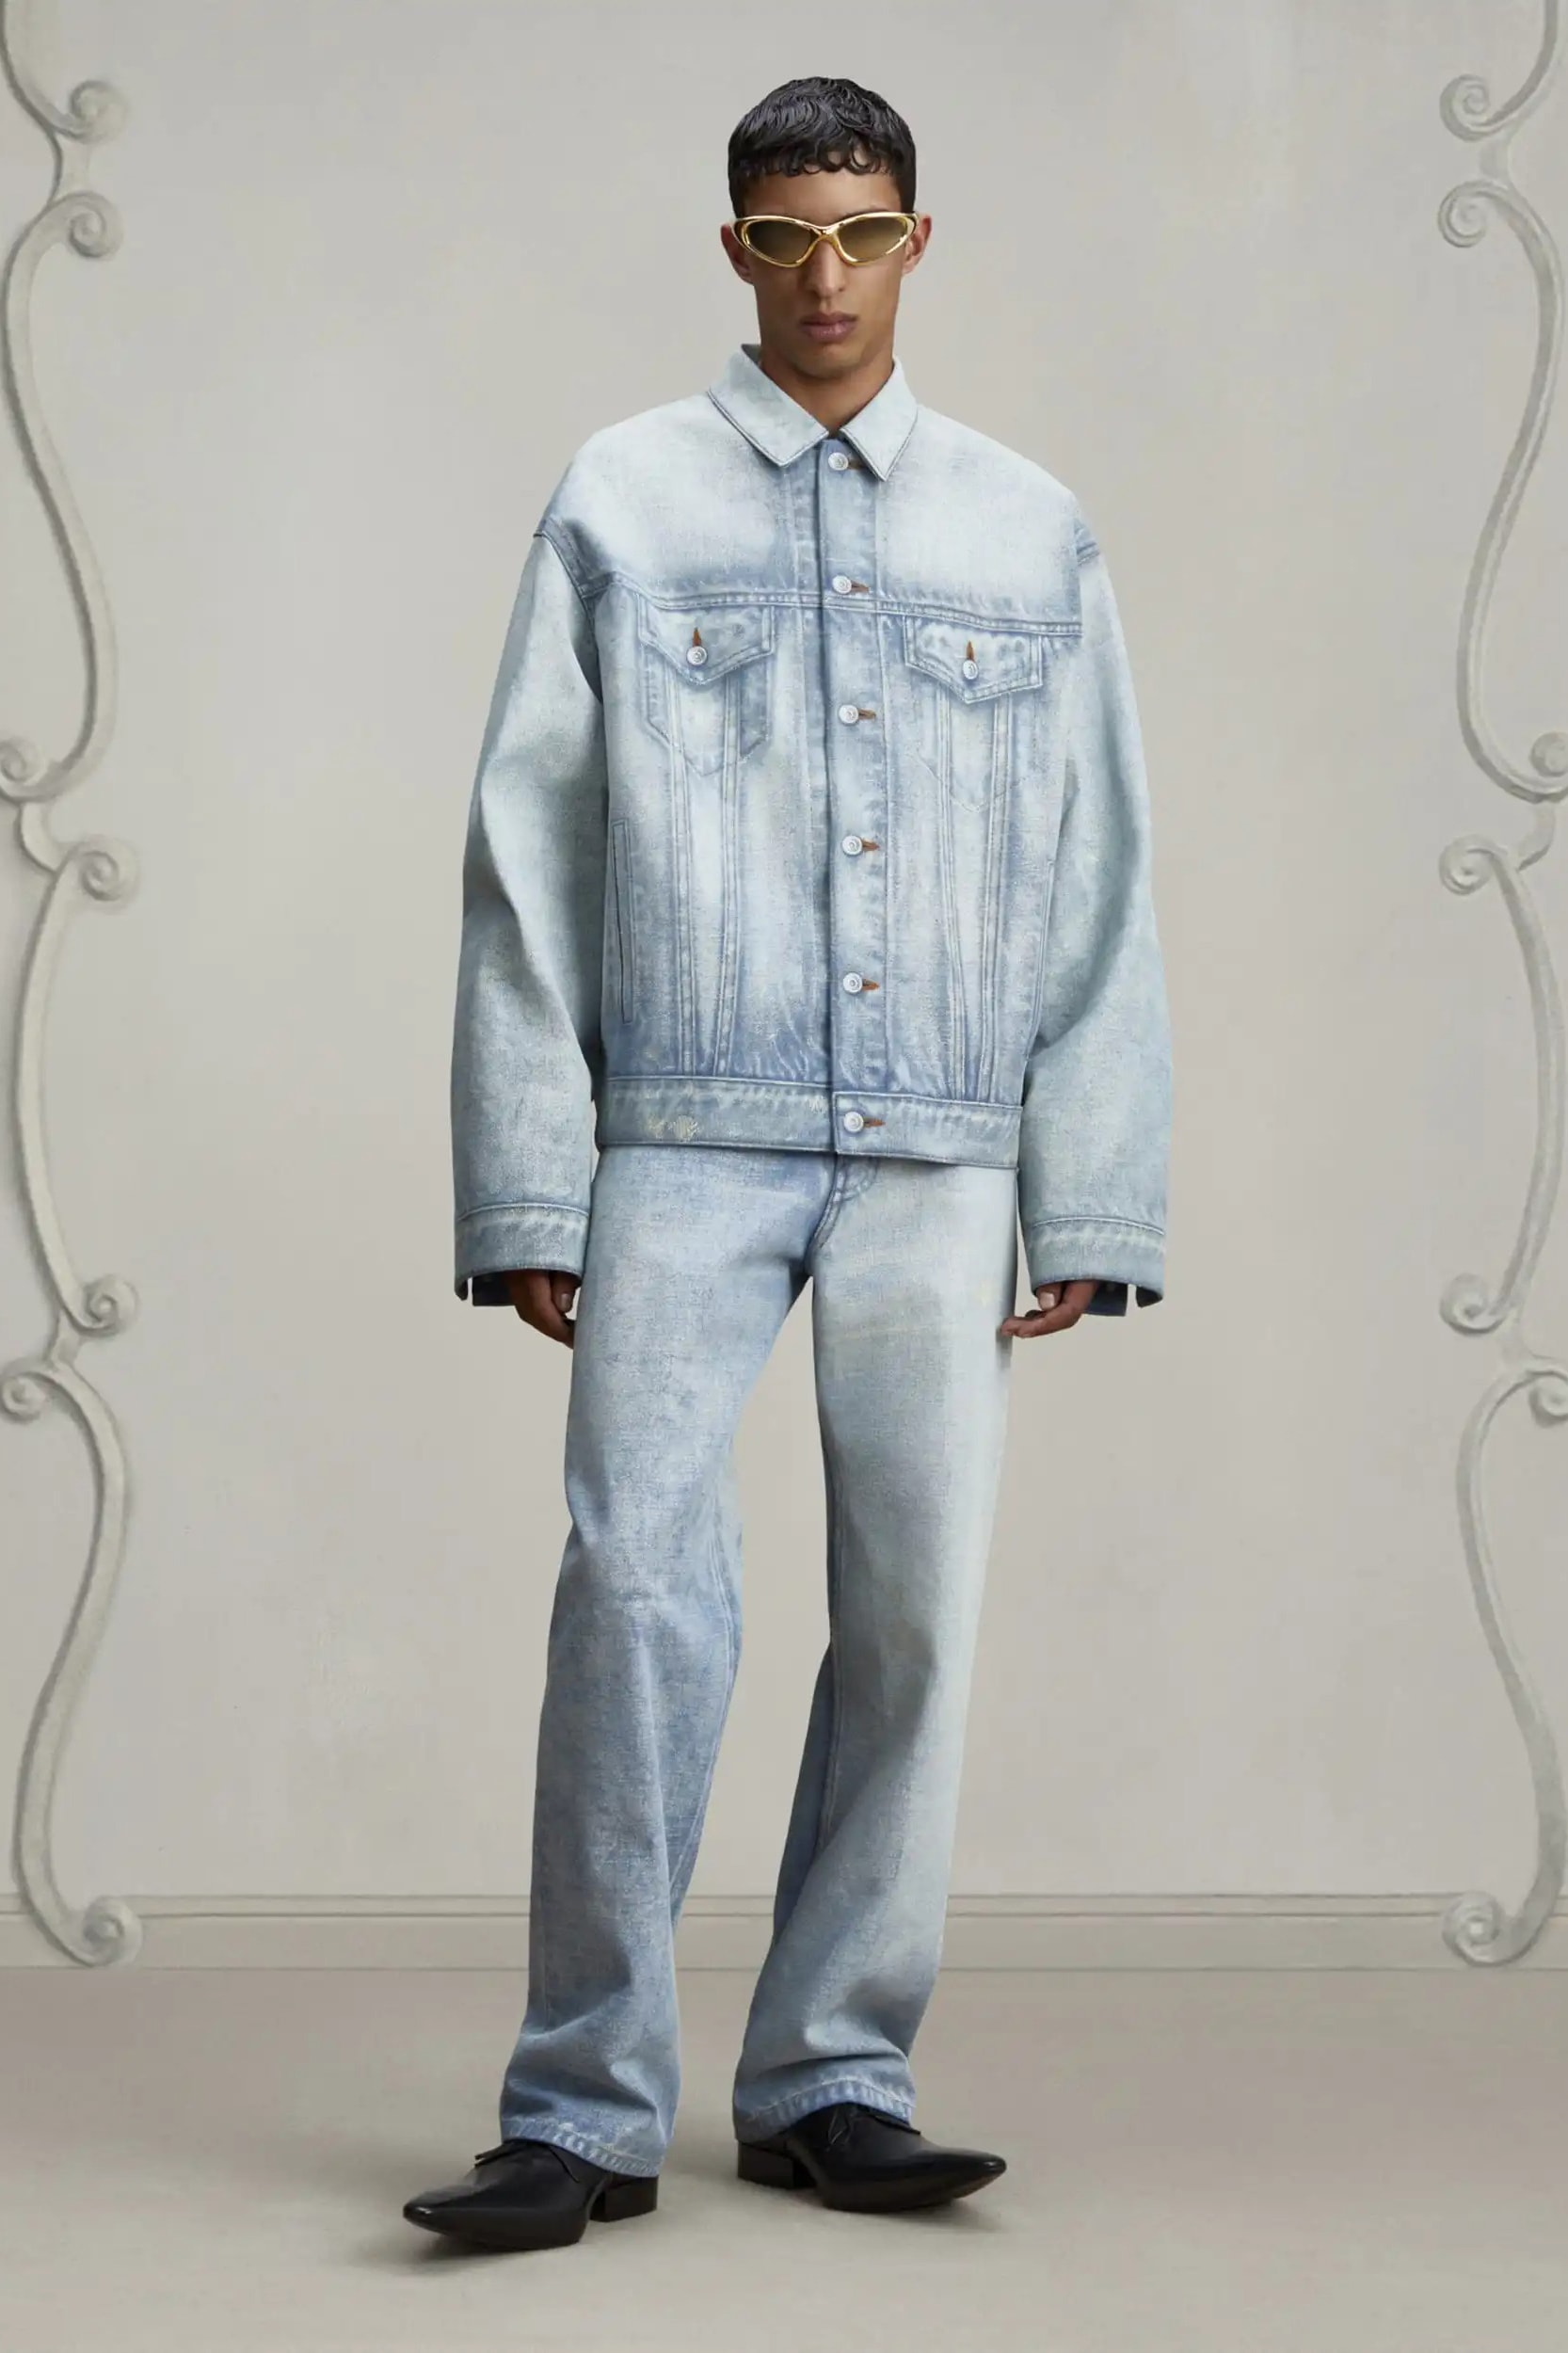 Balenciaga Couture 52nd Collection Prices How Much Buy Coat Dress Hand Made Denim Demna 